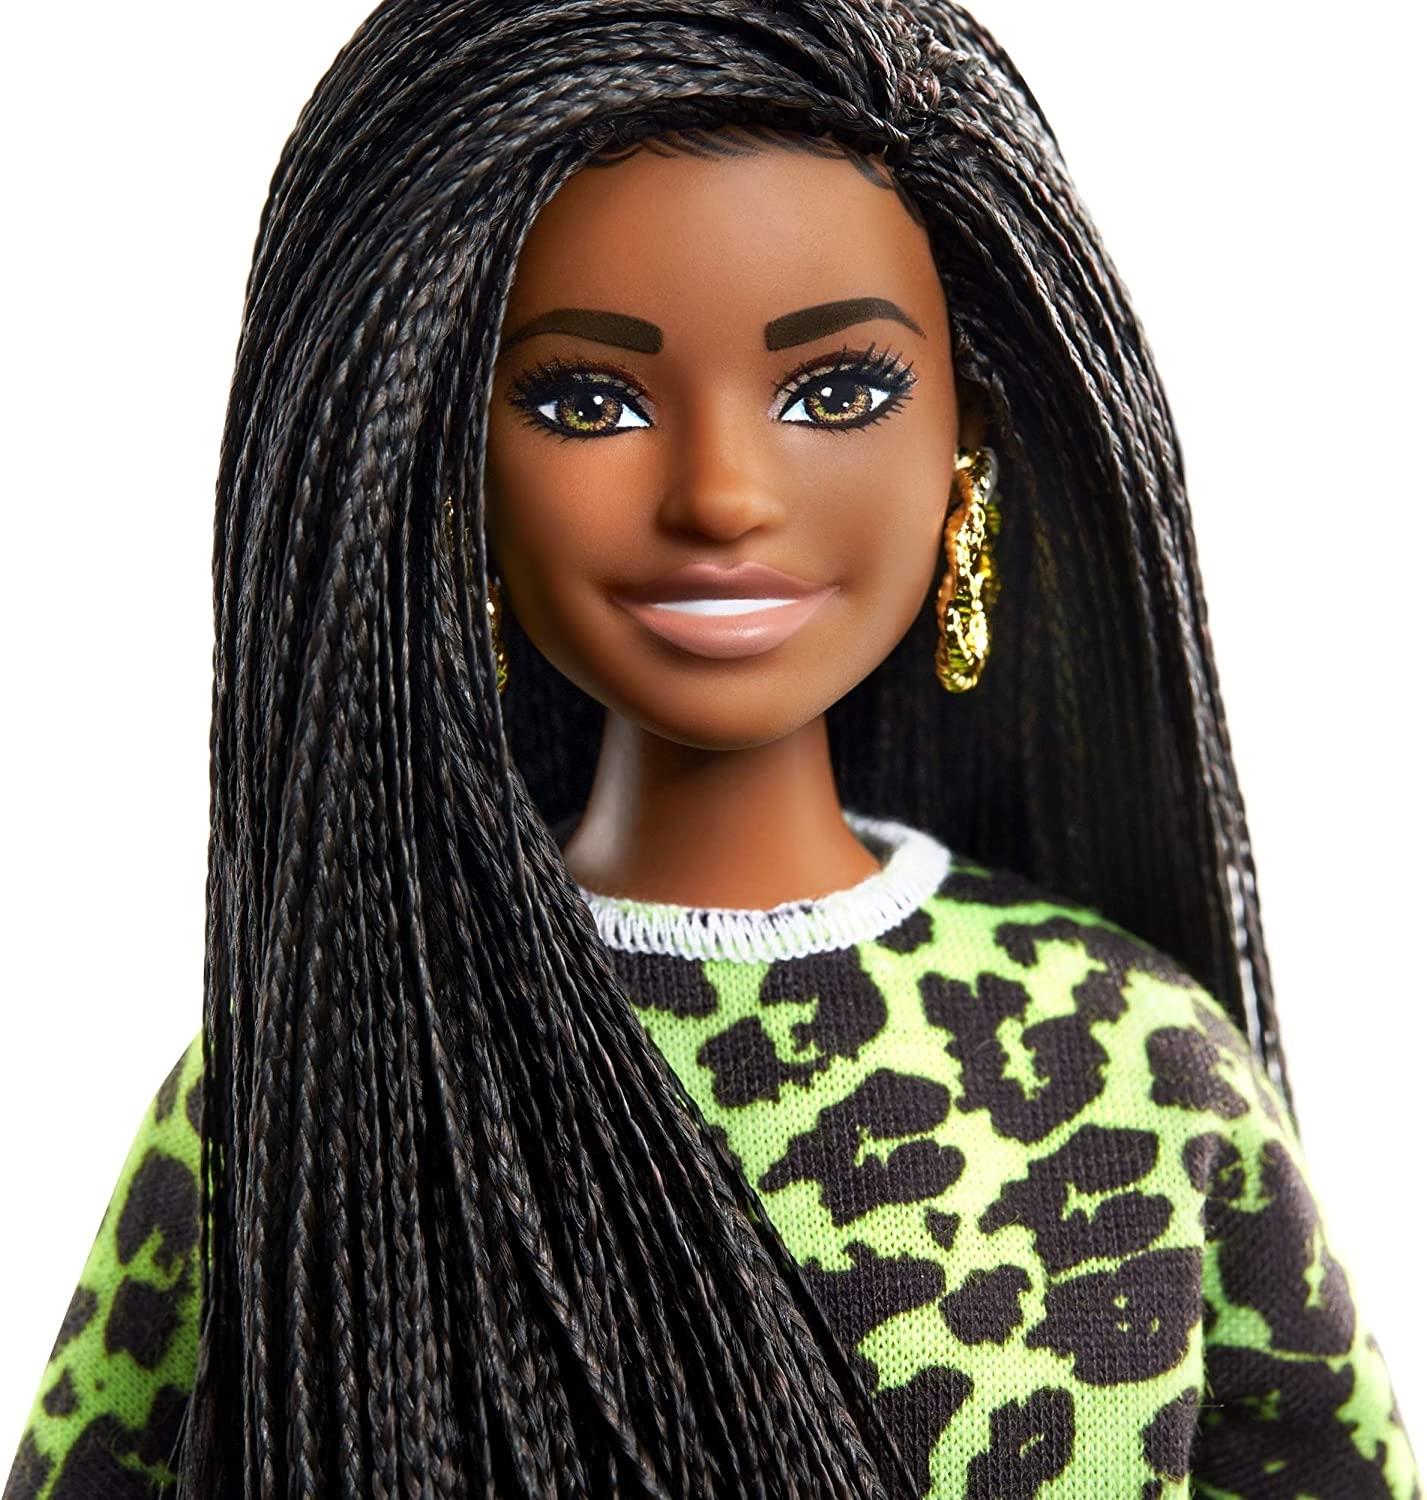 Barbie Fashionistas in Animal-Print Top by The Magic Toy Shop - UKBuyZone